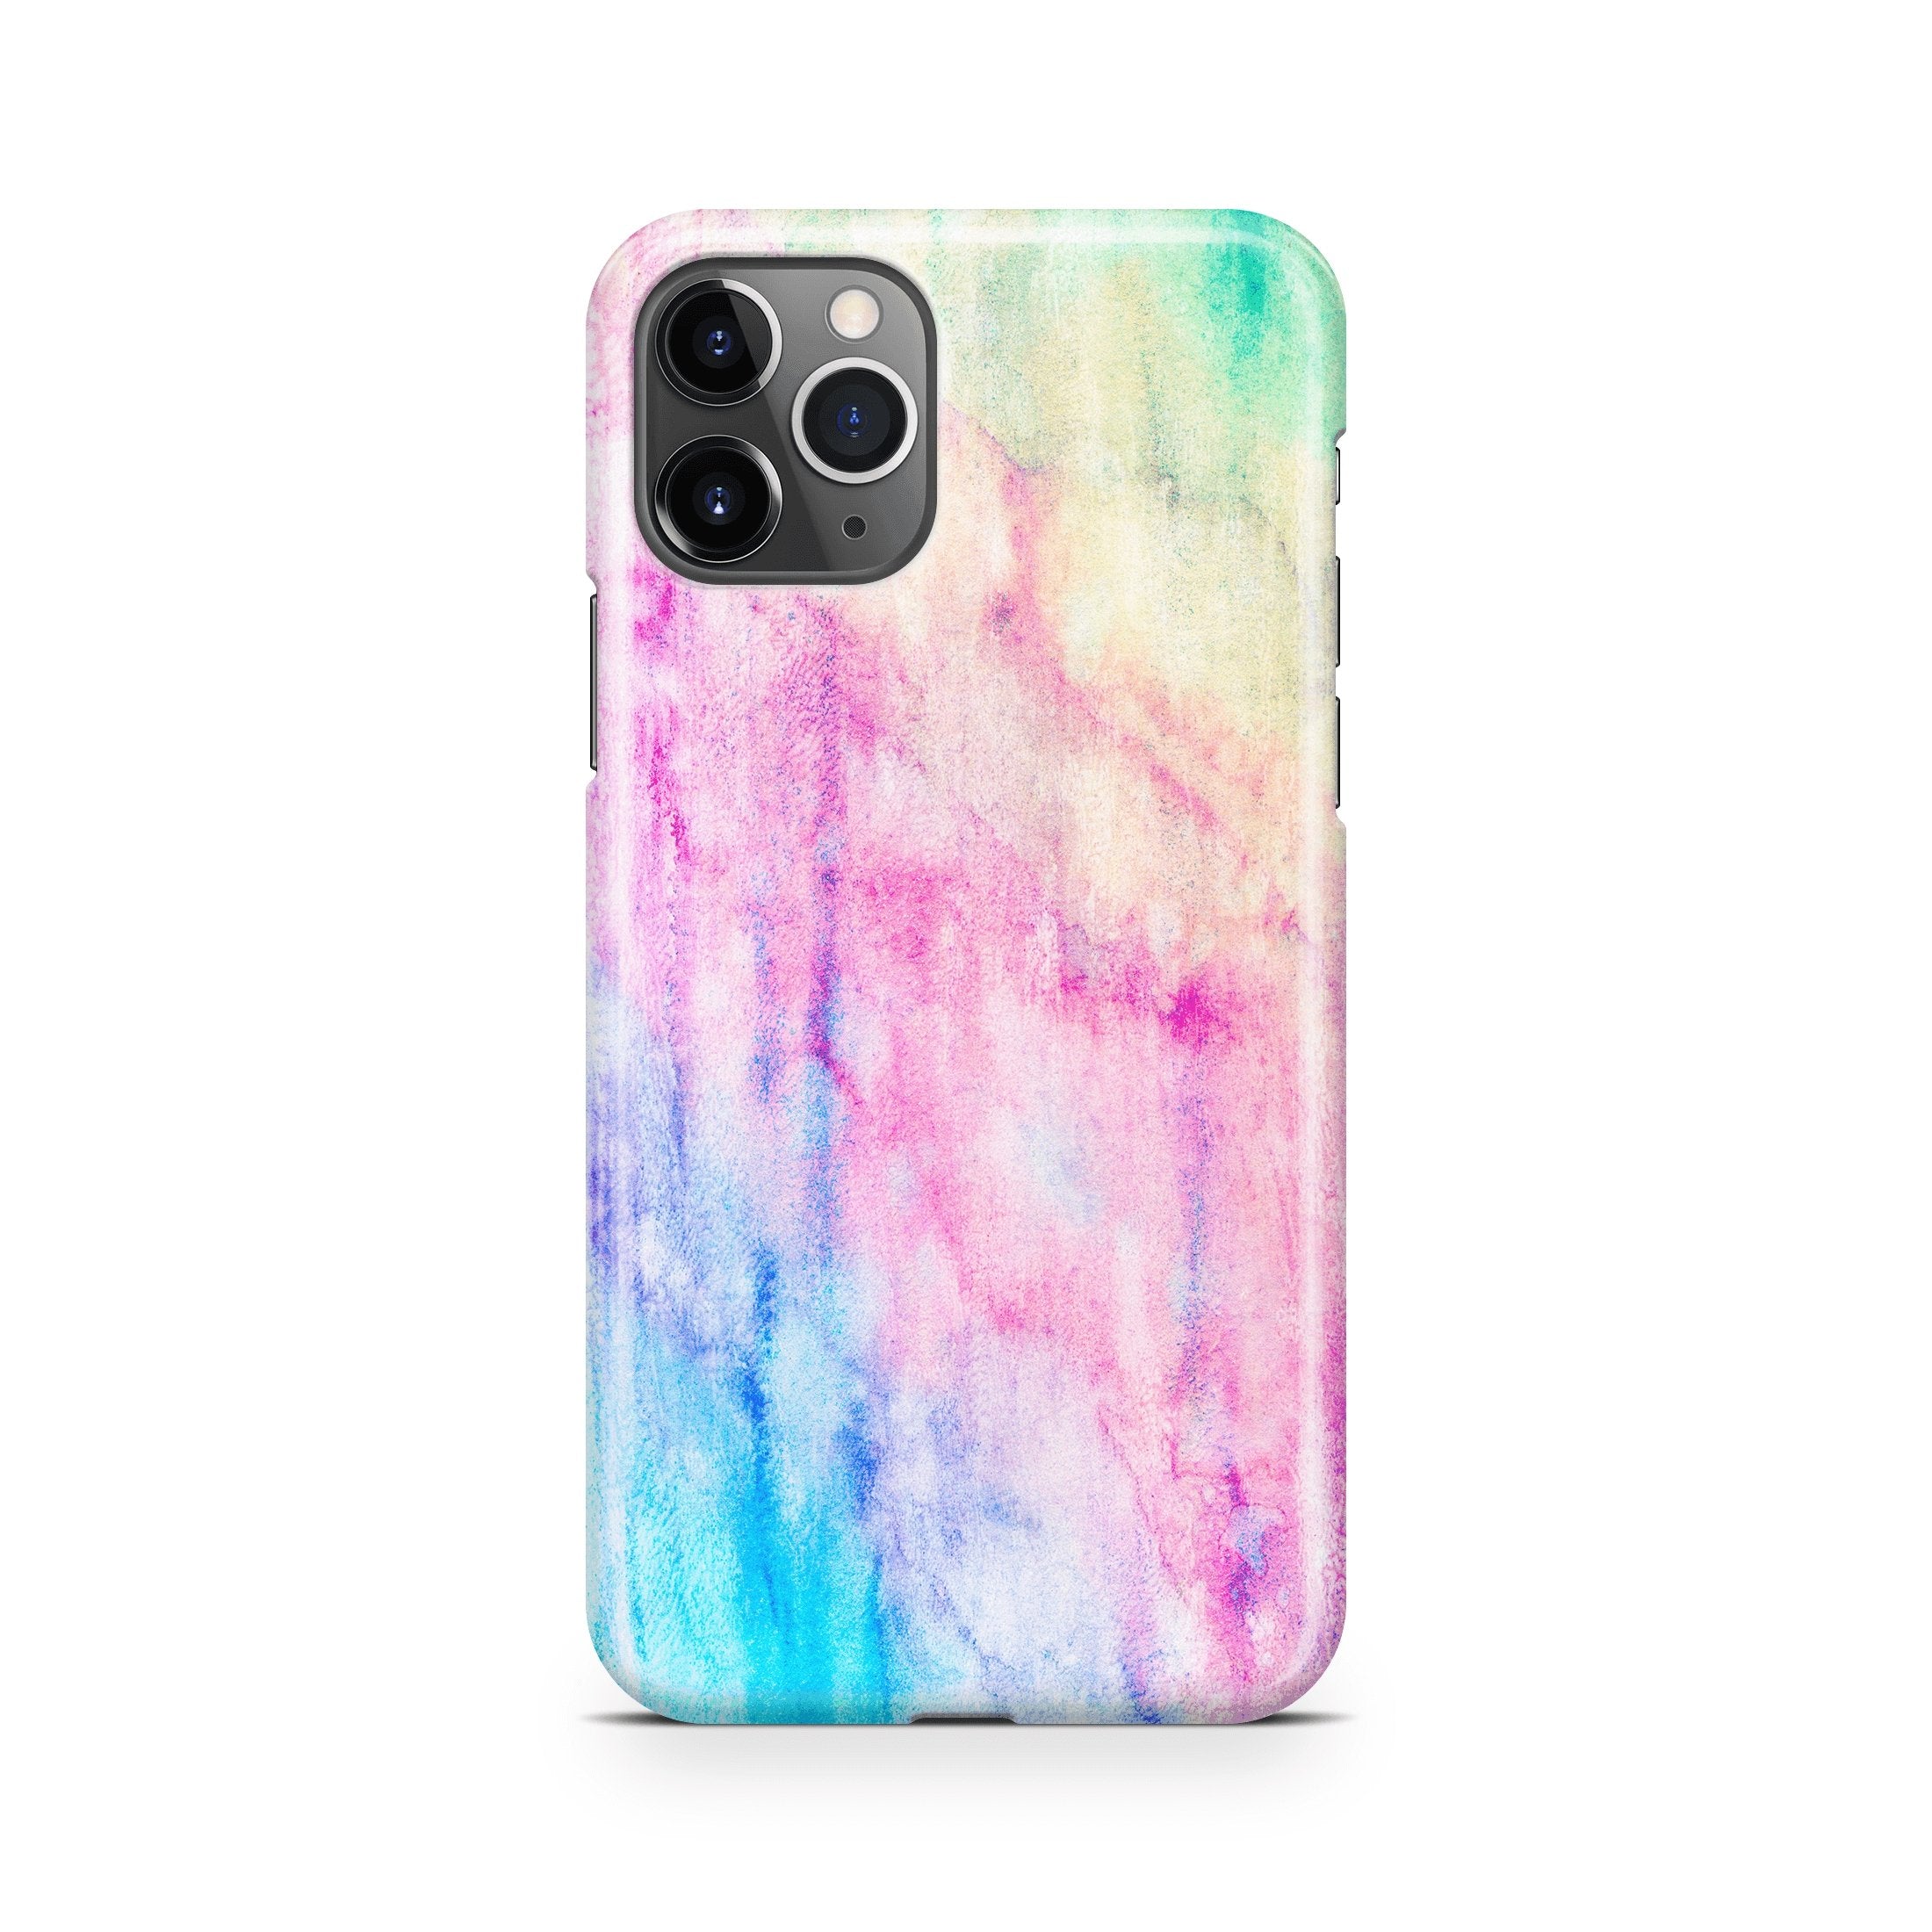 Fading Rainbow - iPhone phone case designs by CaseSwagger